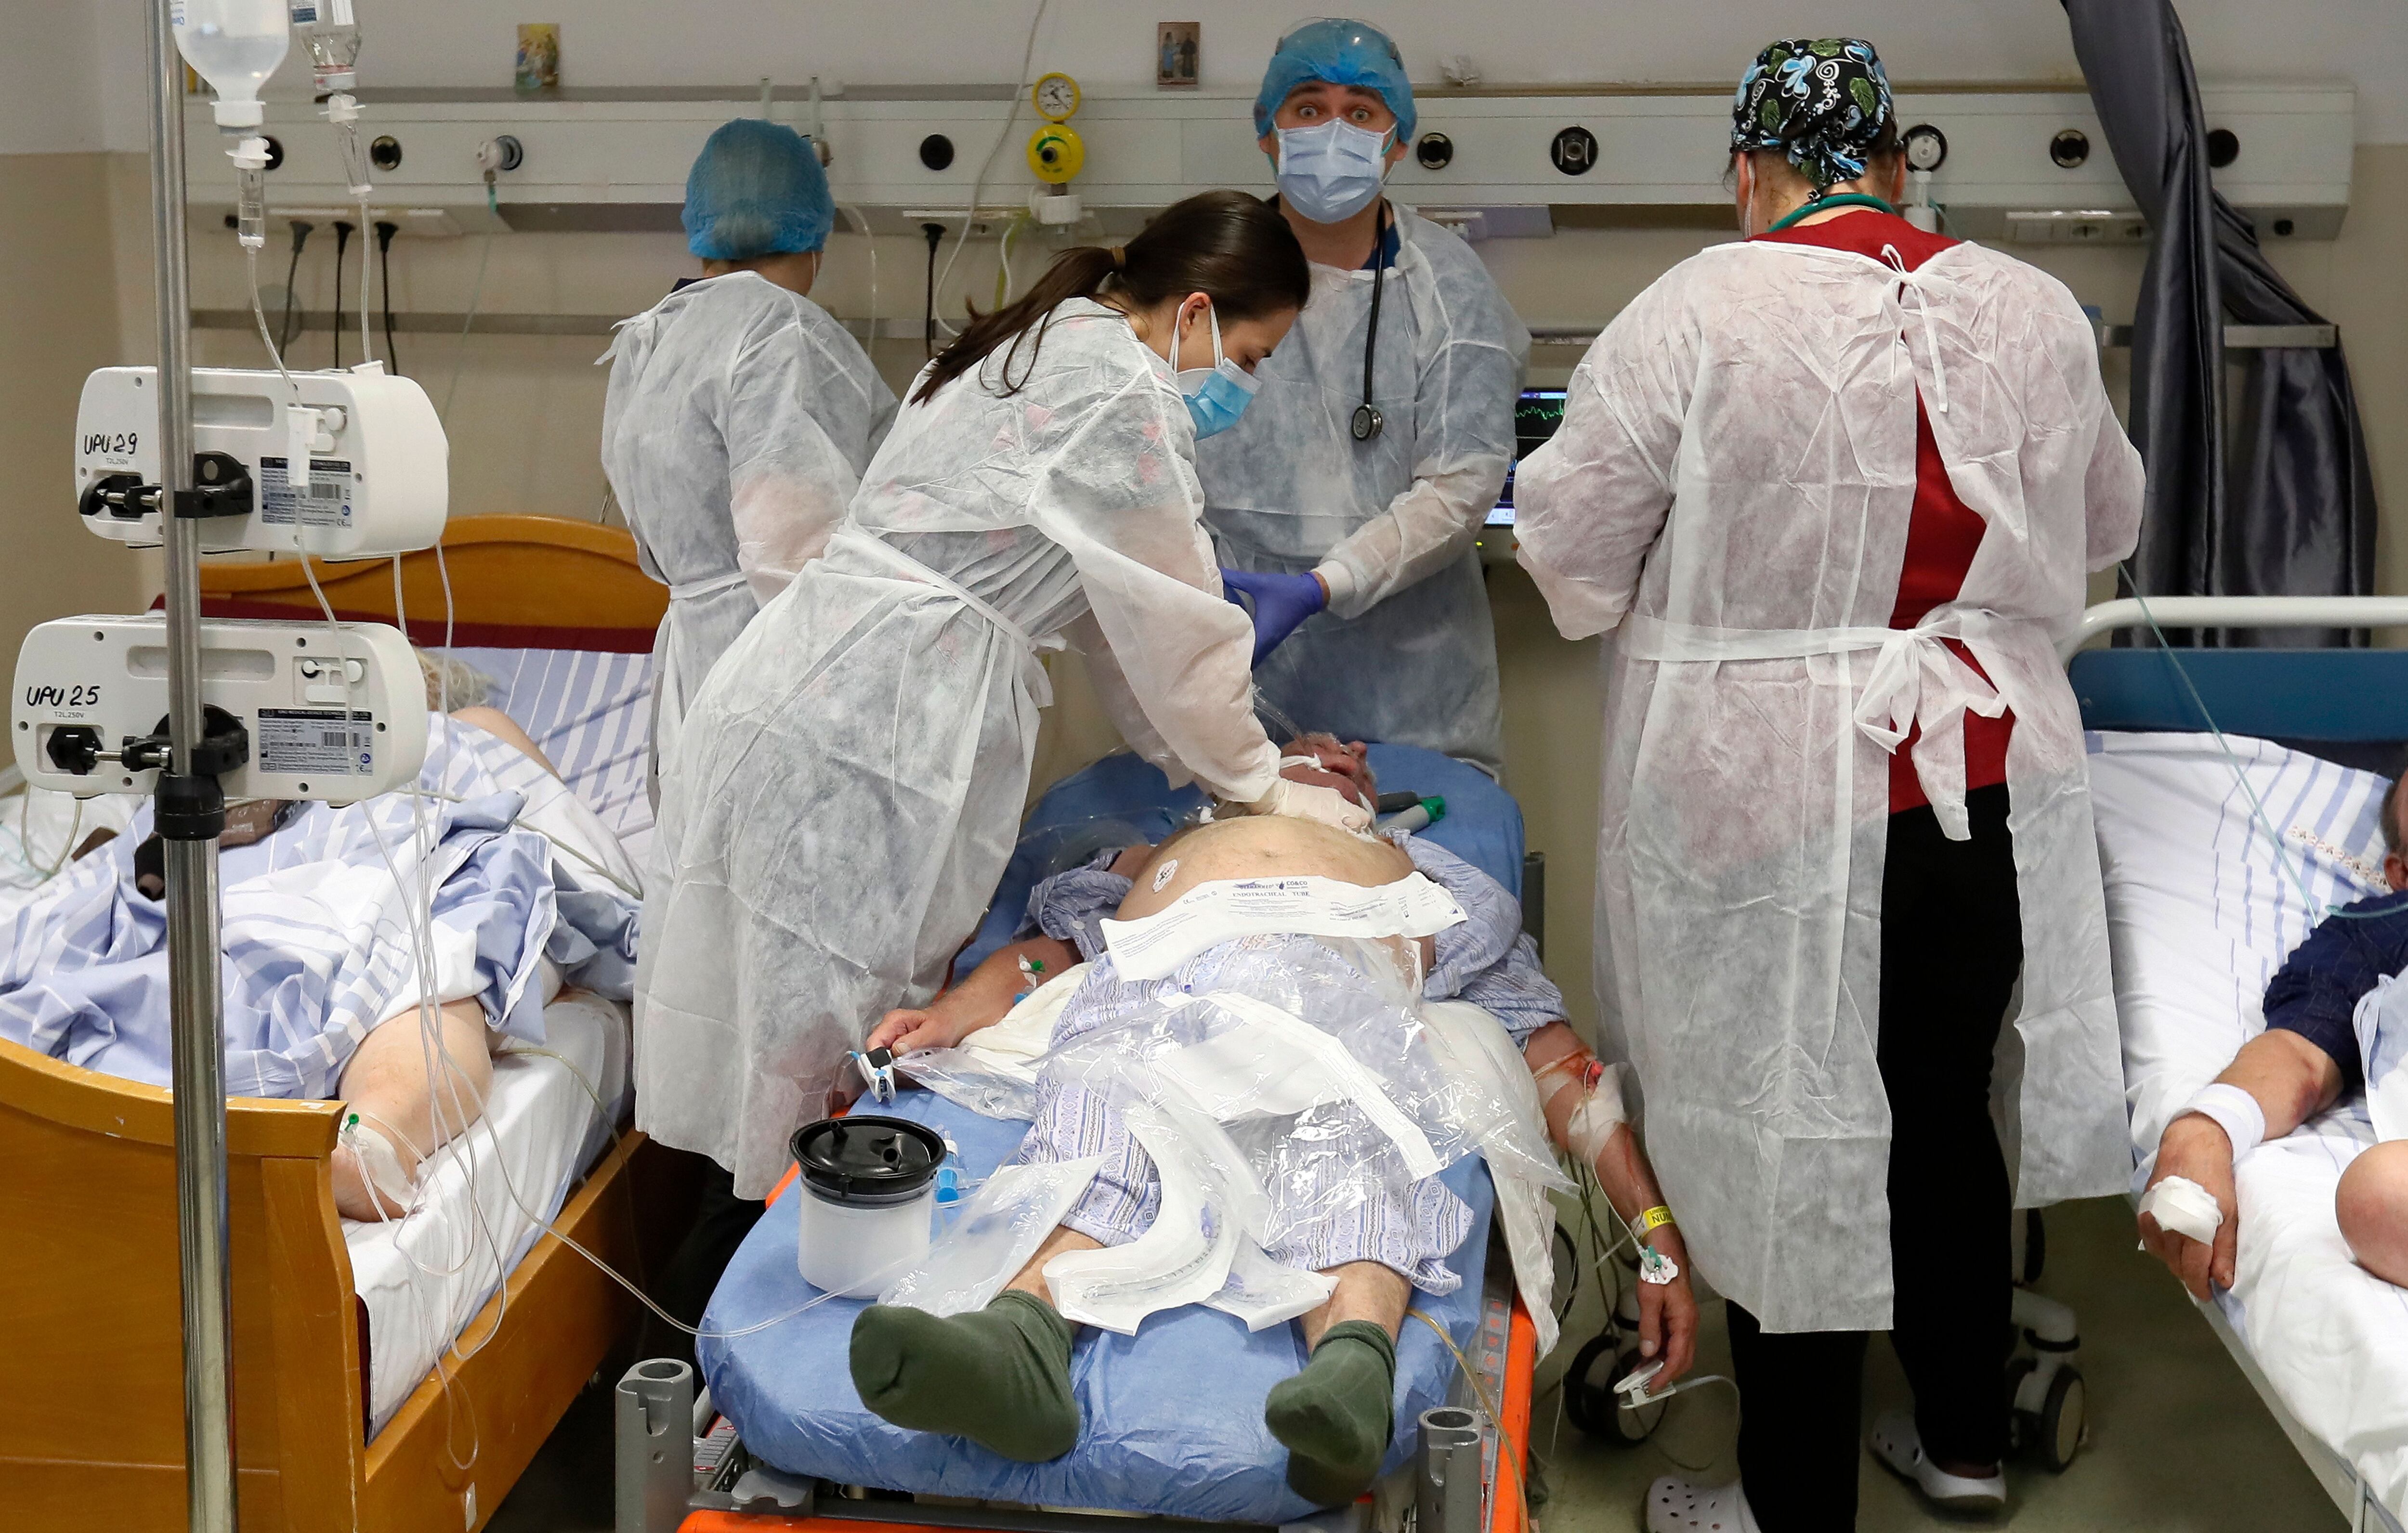 The University Hospital of Bucharest is collapsed by the new wave of the pandemic that is shaking the country.  Romania is the second nation with the lowest vaccination rate in Europe, behind Hungary.  EFE / EPA / ROBERT GHEMENT
